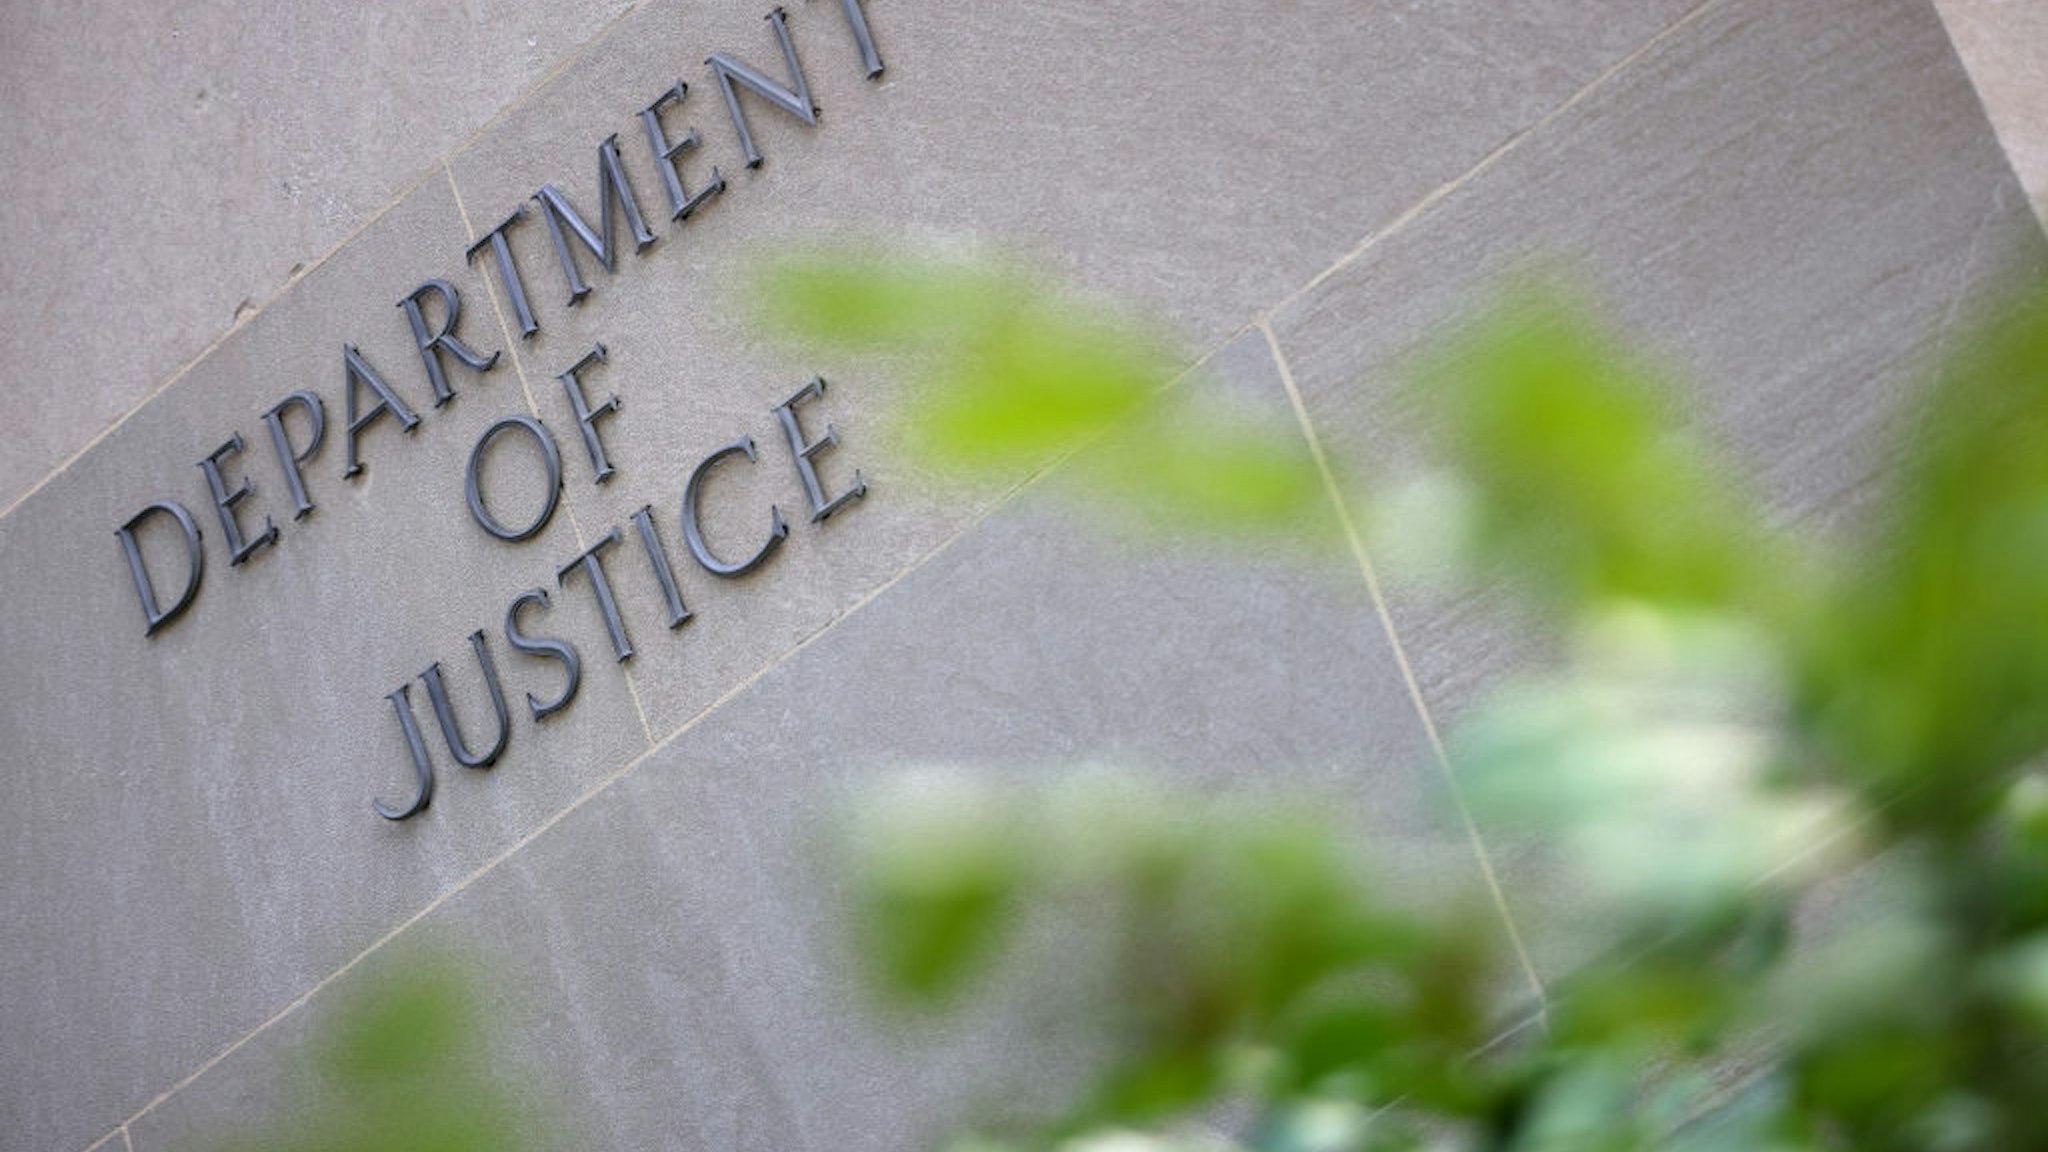 WASHINGTON, DC - JUNE 14: A sign at the U.S. Department of Justice is seen on June 14, 2021 in Washington, DC. U.S. Attorney General is expected to meet with media executives, including members of CNN, The New York Times and The Washington Post, after Trump's Justice Department attempted to obtain email and phone records from journalists.